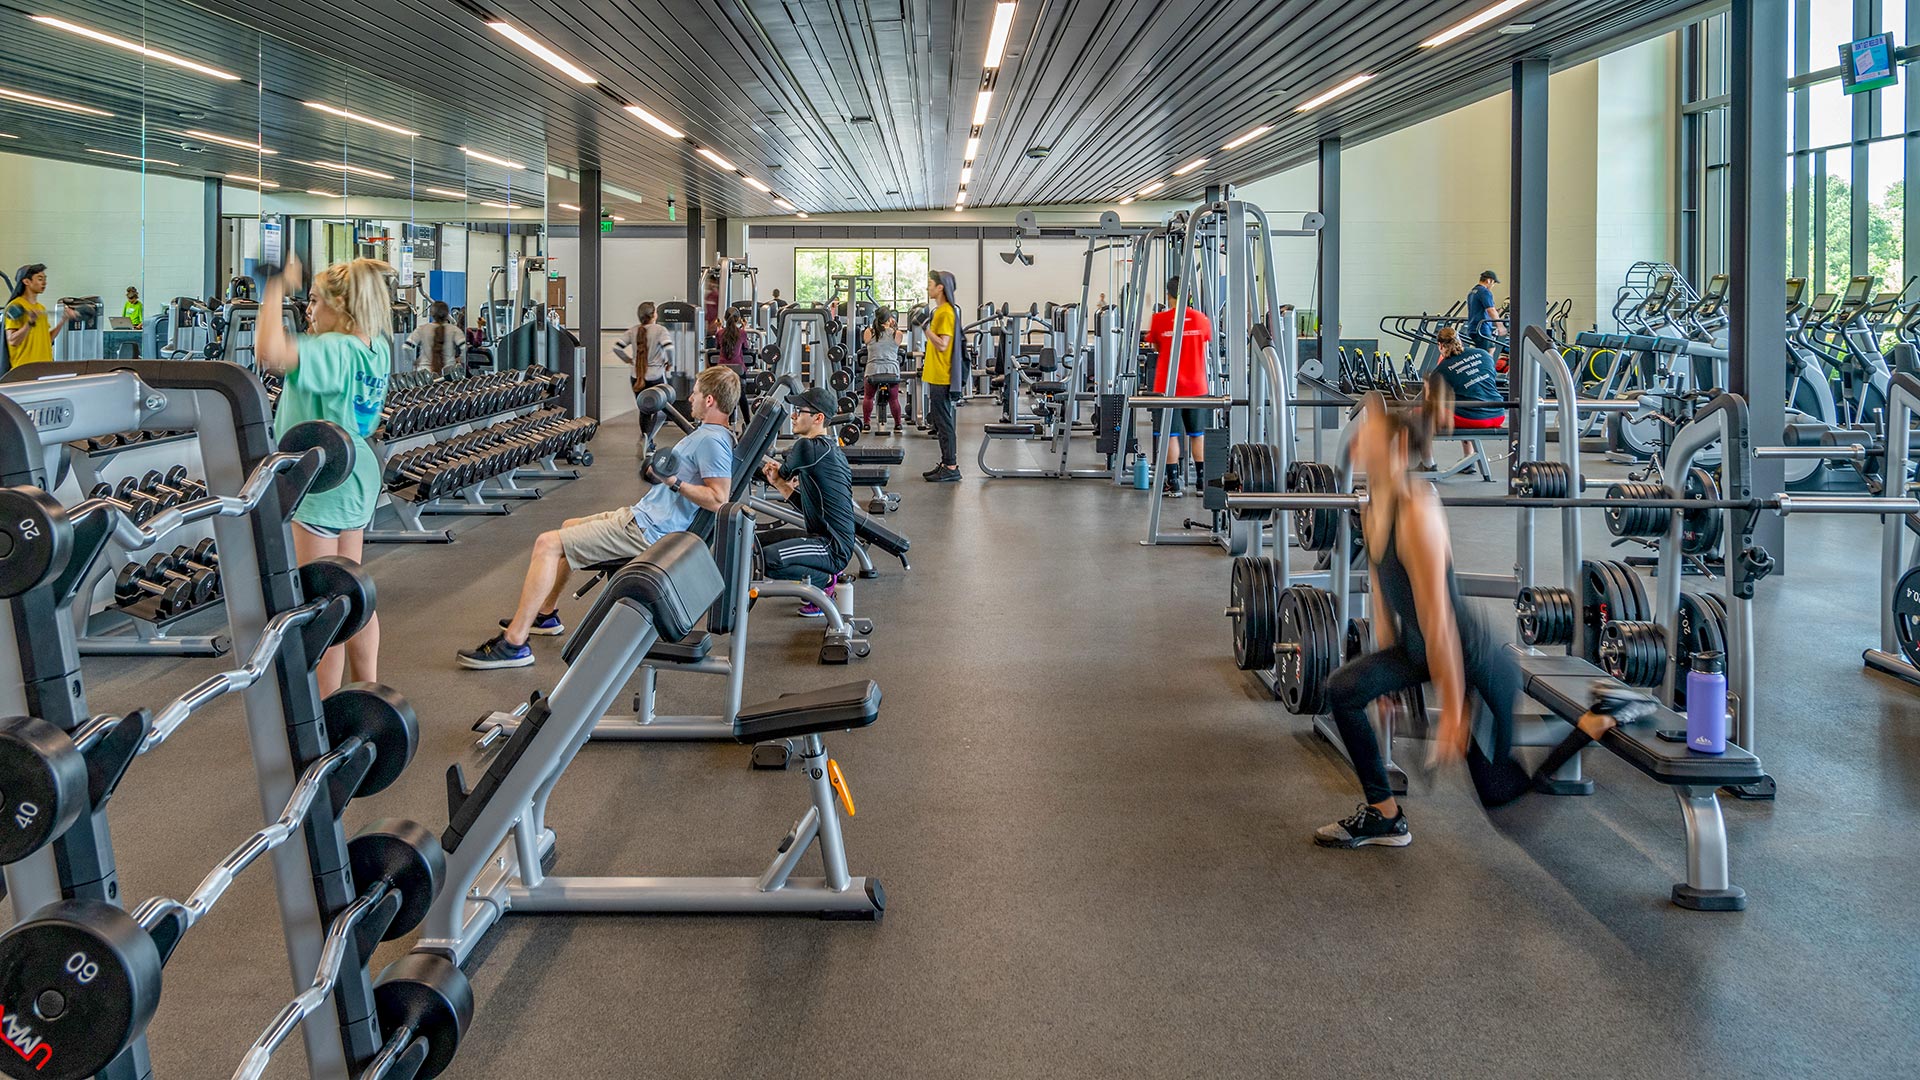 Workout equipment at the UHCL Recreation and Wellness Center including free weights and machines